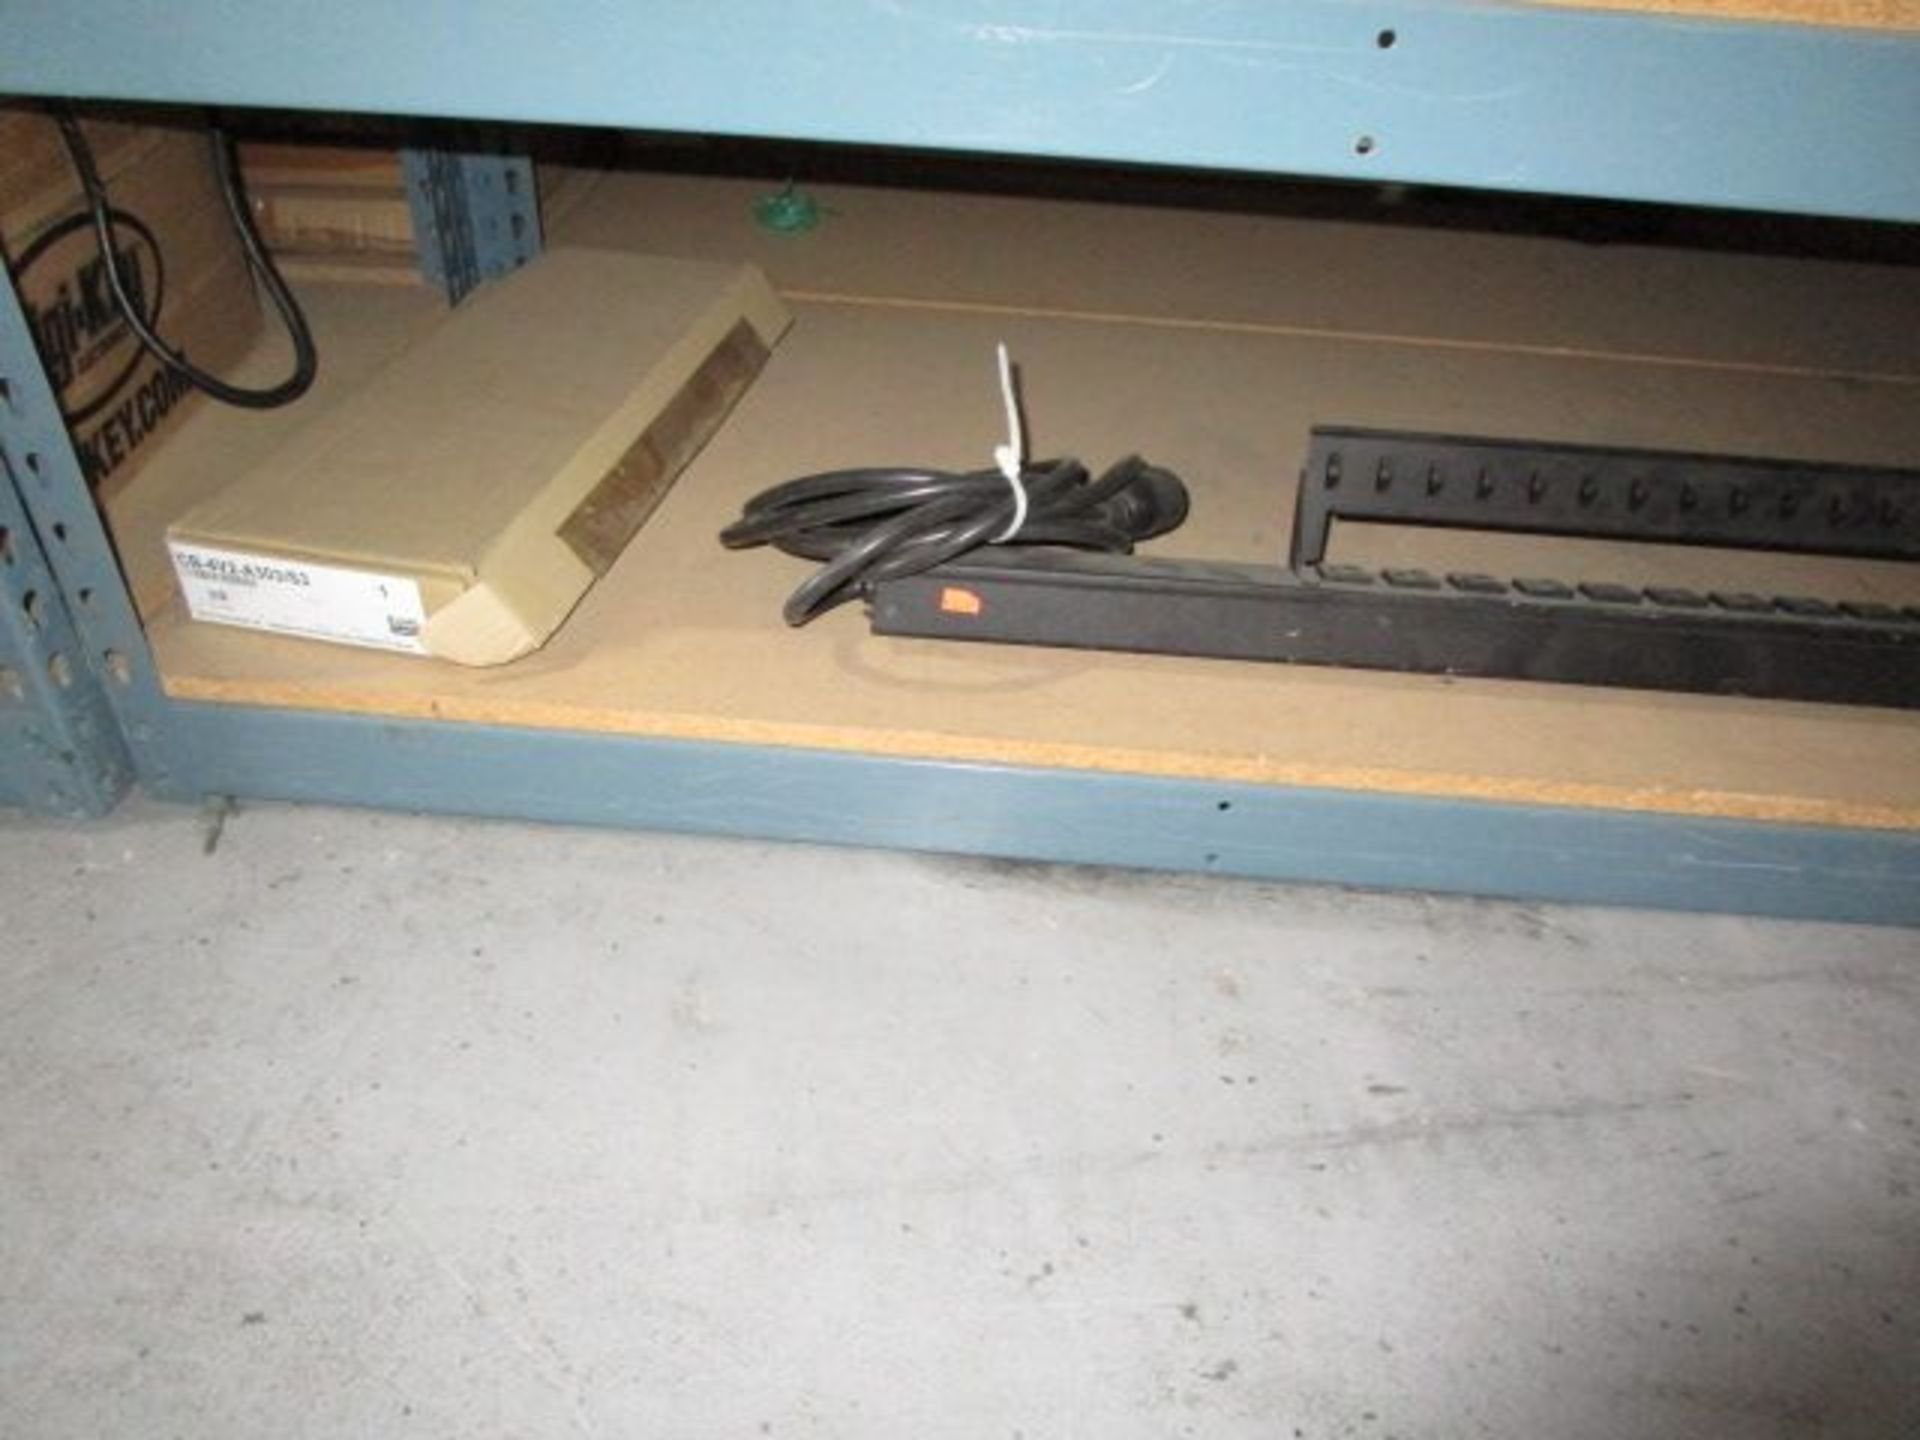 SHELVING UNIT OF ASSORTMENT POWER STRIPS - Image 11 of 12